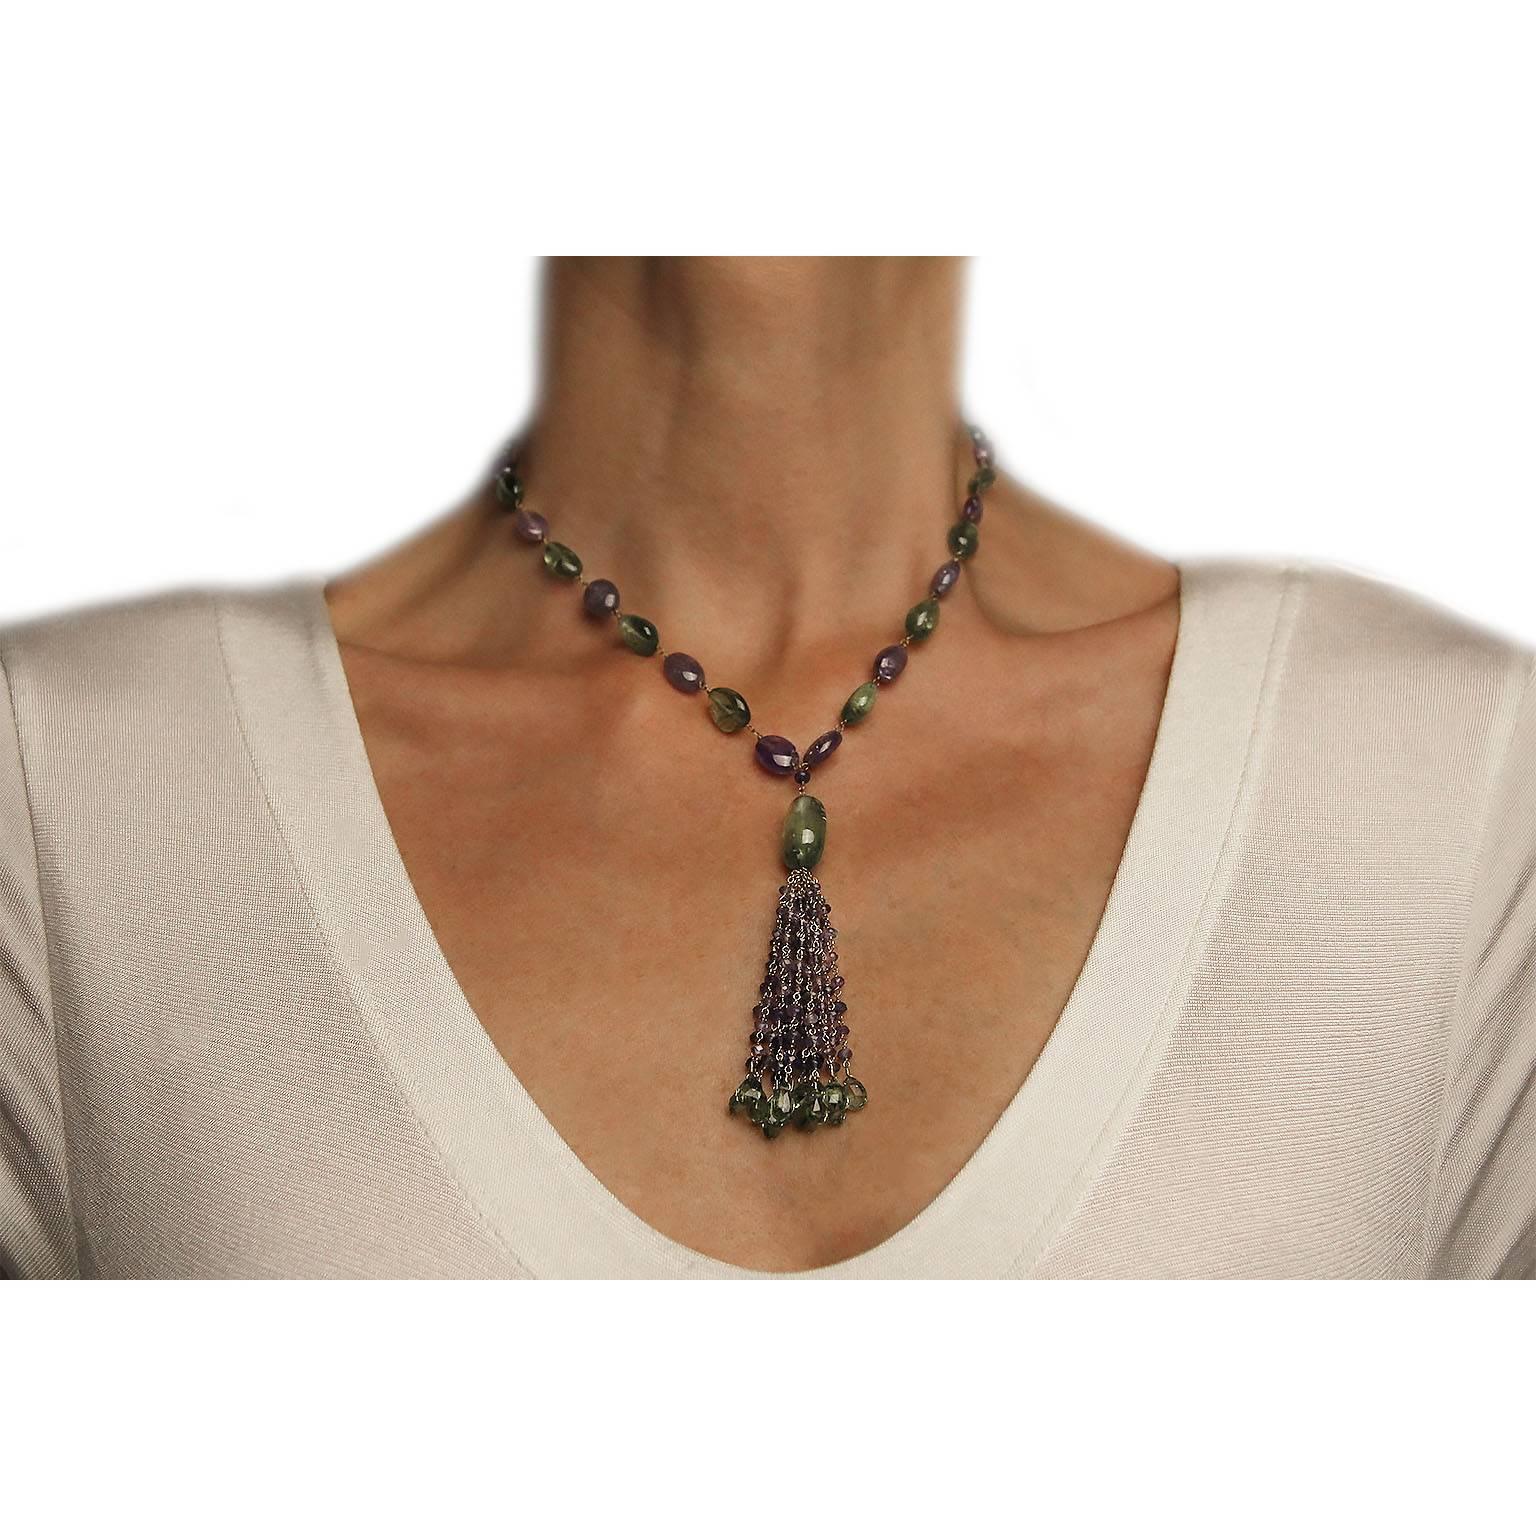 Jona design collection, hand crafted in Italy, 18 karat yellow gold tassel necklace, featuring 203.75 carats of Iolite and Peridot beads.
All Jona jewelry is new and has never been previously owned or worn. Each item will arrive at your door